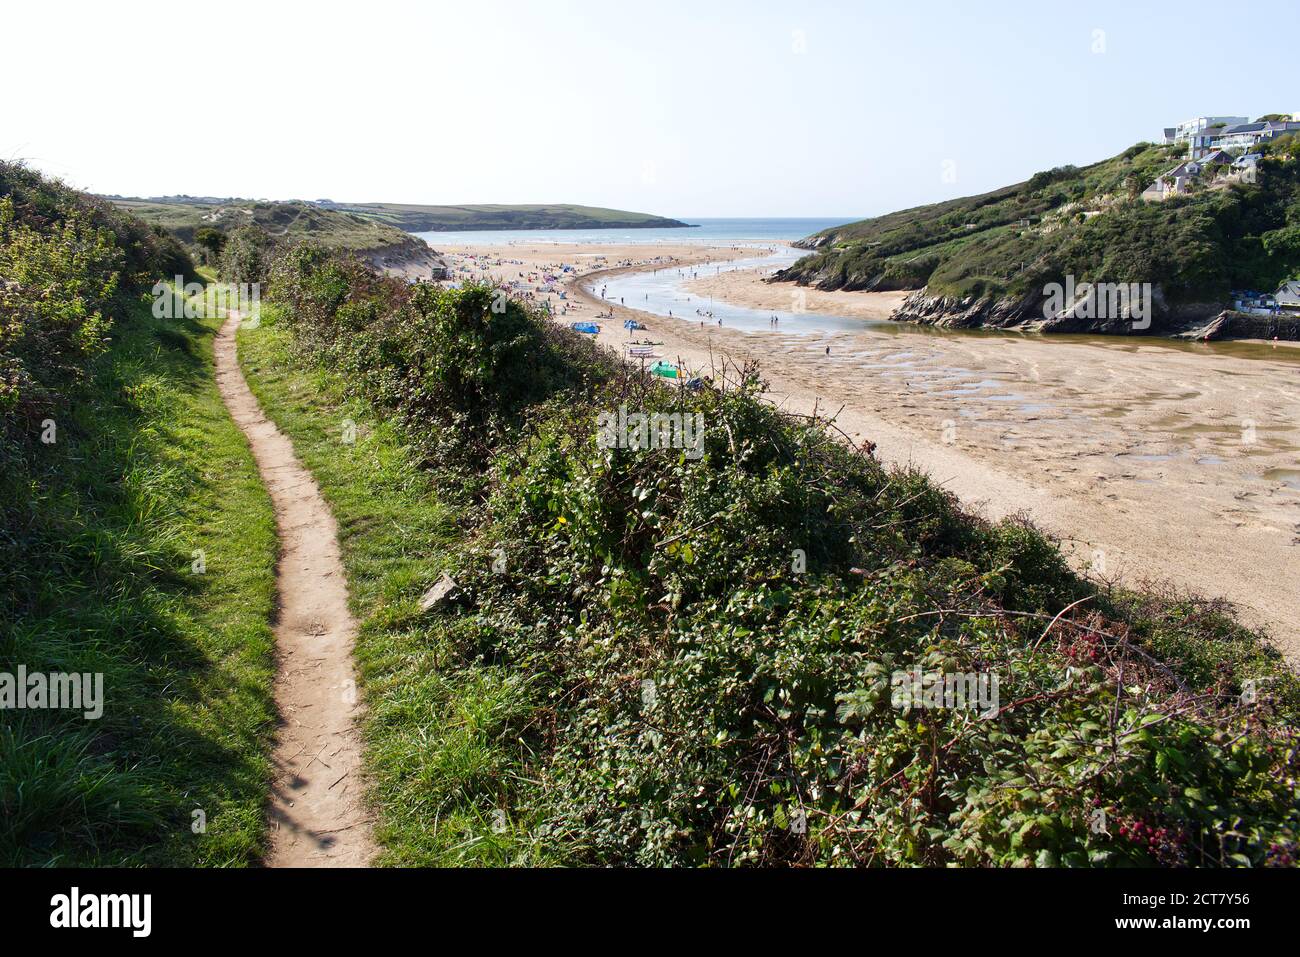 Gannel Estuary, Newquay, Cornwall, UK - September 17 2020: The South West Coast Path runs beside the river Gannel with people enjoying the sandy beach Stock Photo